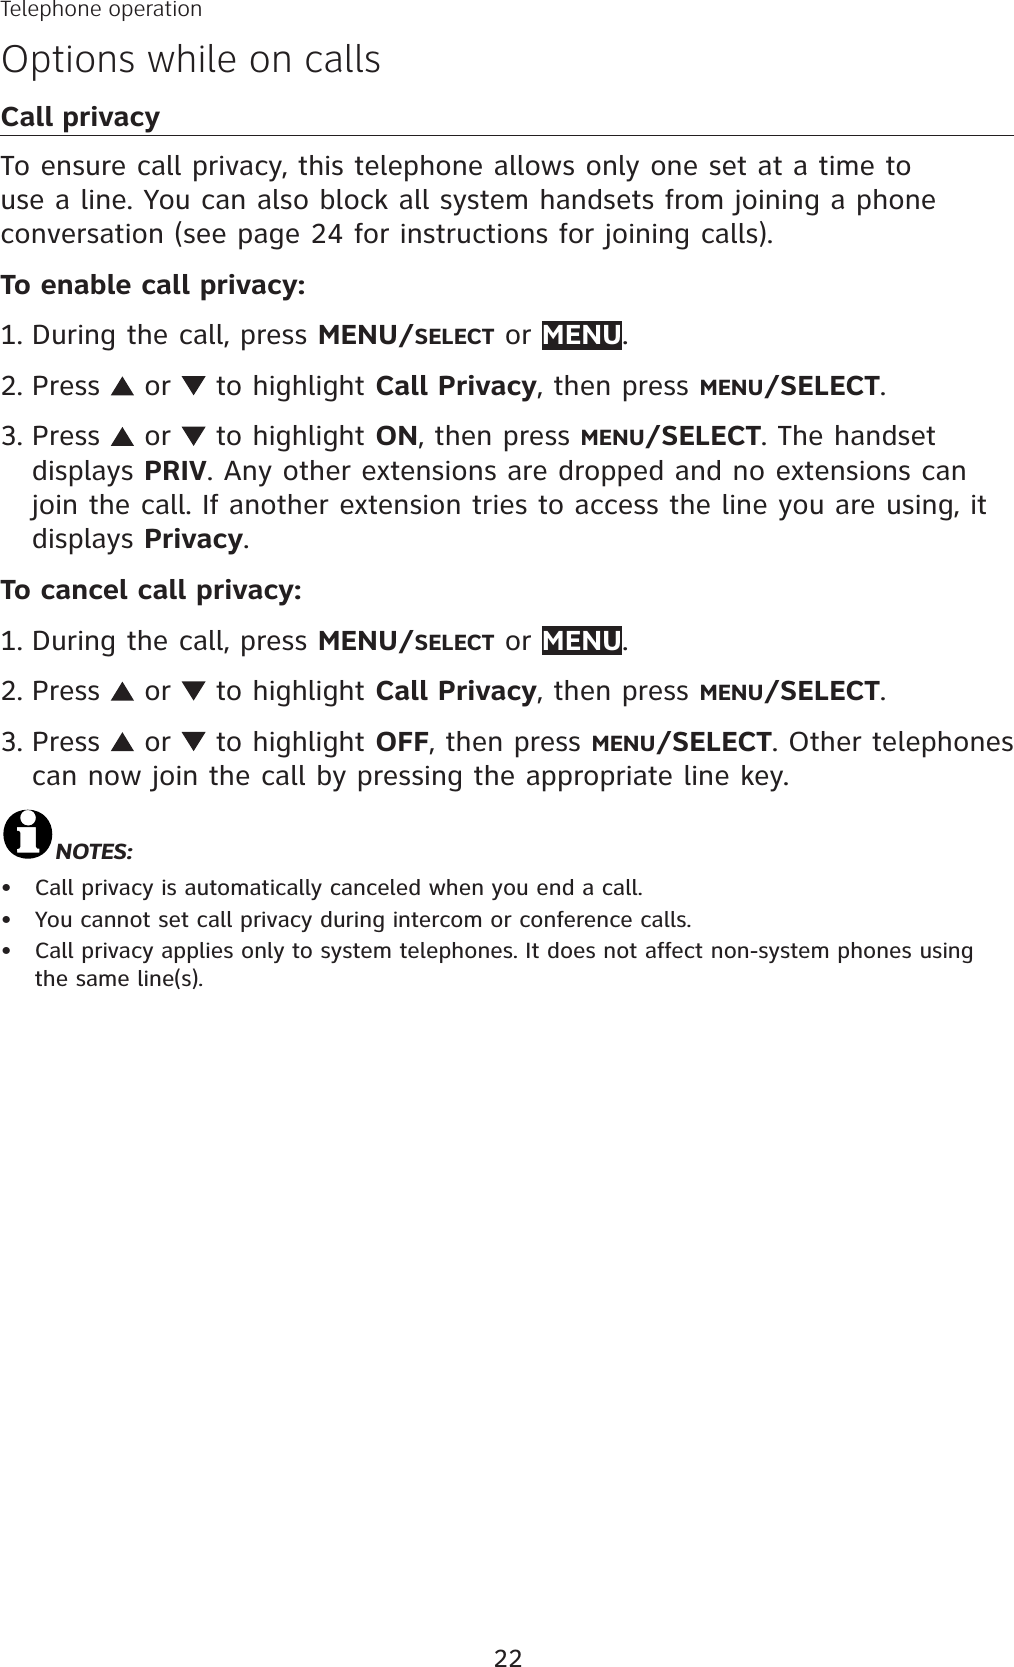 22Telephone operationOptions while on callsCall privacyTo ensure call privacy, this telephone allows only one set at a time to use a line. You can also block all system handsets from joining a phone conversation (see page 24 for instructions for joining calls).To enable call privacy:During the call, press MENU/SELECT or MENU.Press   or   to highlight Call Privacy, then press MENU/SELECT.Press   or   to highlight ON, then press MENU/SELECT. The handset displays PRIV. Any other extensions are dropped and no extensions can join the call. If another extension tries to access the line you are using, it displays Privacy.To cancel call privacy:During the call, press MENU/SELECT or MENU.Press   or   to highlight Call Privacy, then press MENU/SELECT.Press   or   to highlight OFF, then press MENU/SELECT. Other telephones can now join the call by pressing the appropriate line key. NOTES:Call privacy is automatically canceled when you end a call. You cannot set call privacy during intercom or conference calls.Call privacy applies only to system telephones. It does not affect non-system phones using the same line(s).1.2.3.1.2.3.•••